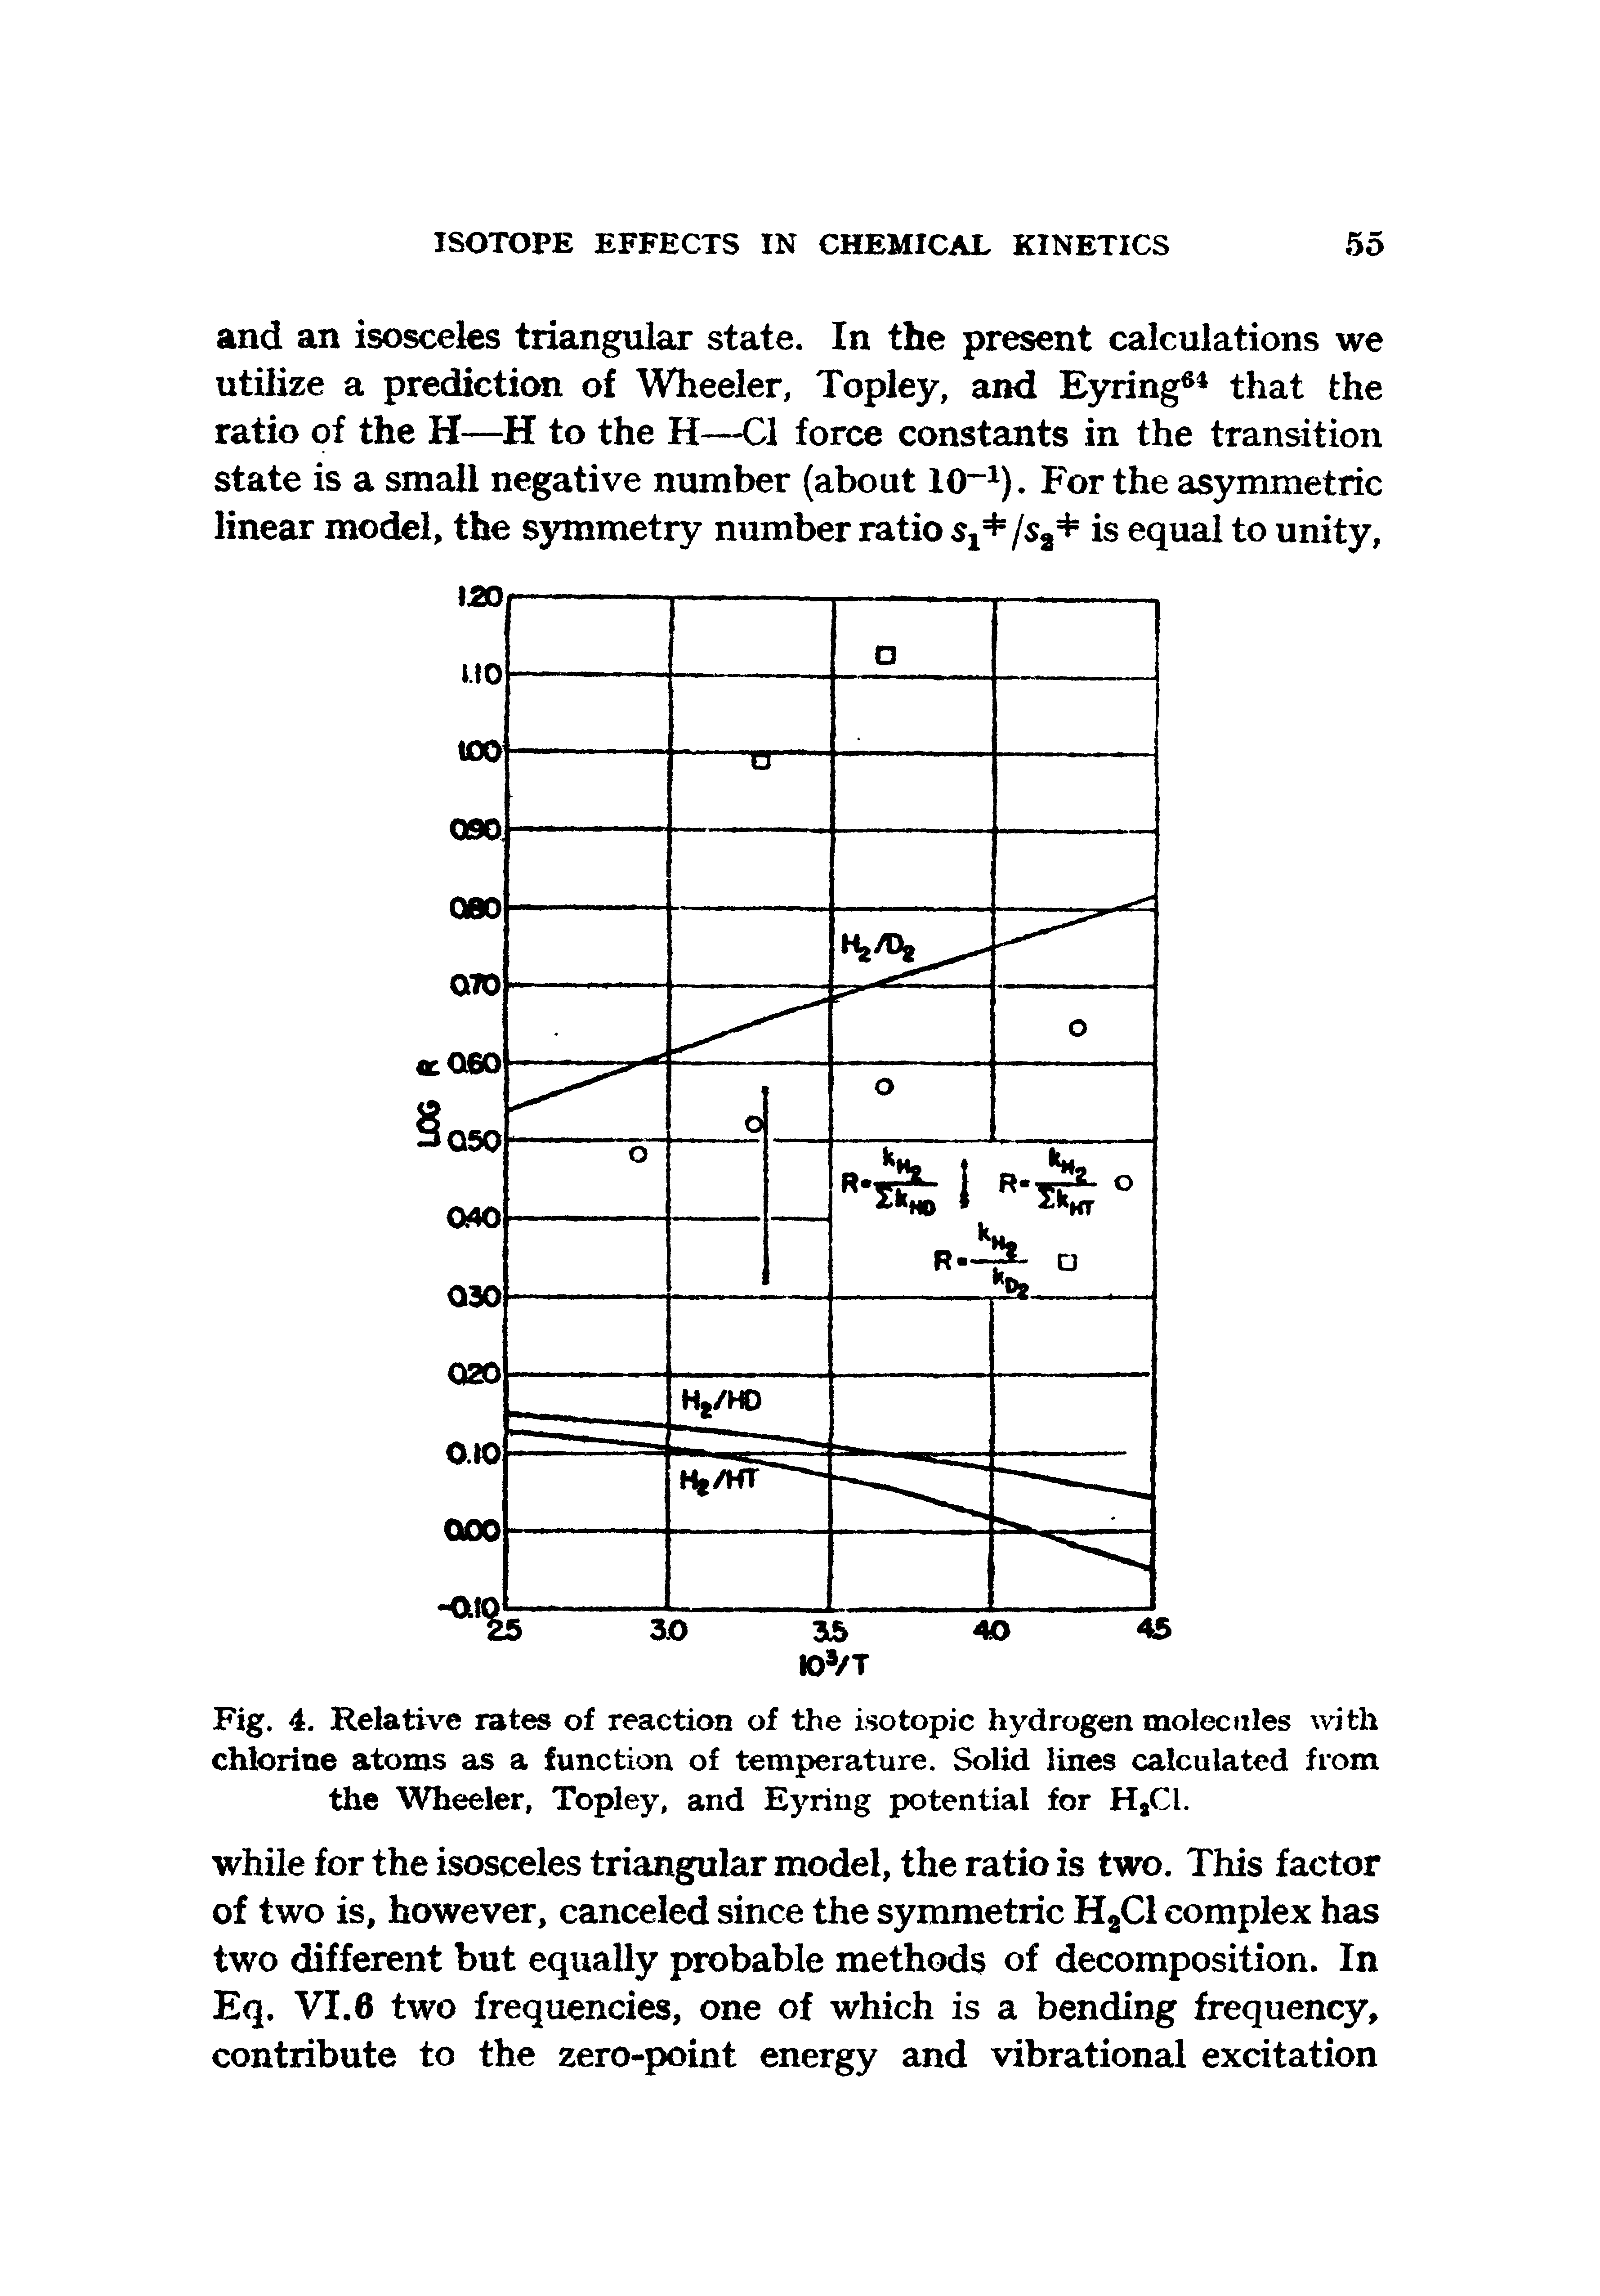 Fig. 4. Relative rates of reaction of the isotopic hydrogen molecules with chlorine atoms as a function of temperature. Solid lines calculated from the Wheeler, Topley, and Eyring potential for H,C1.